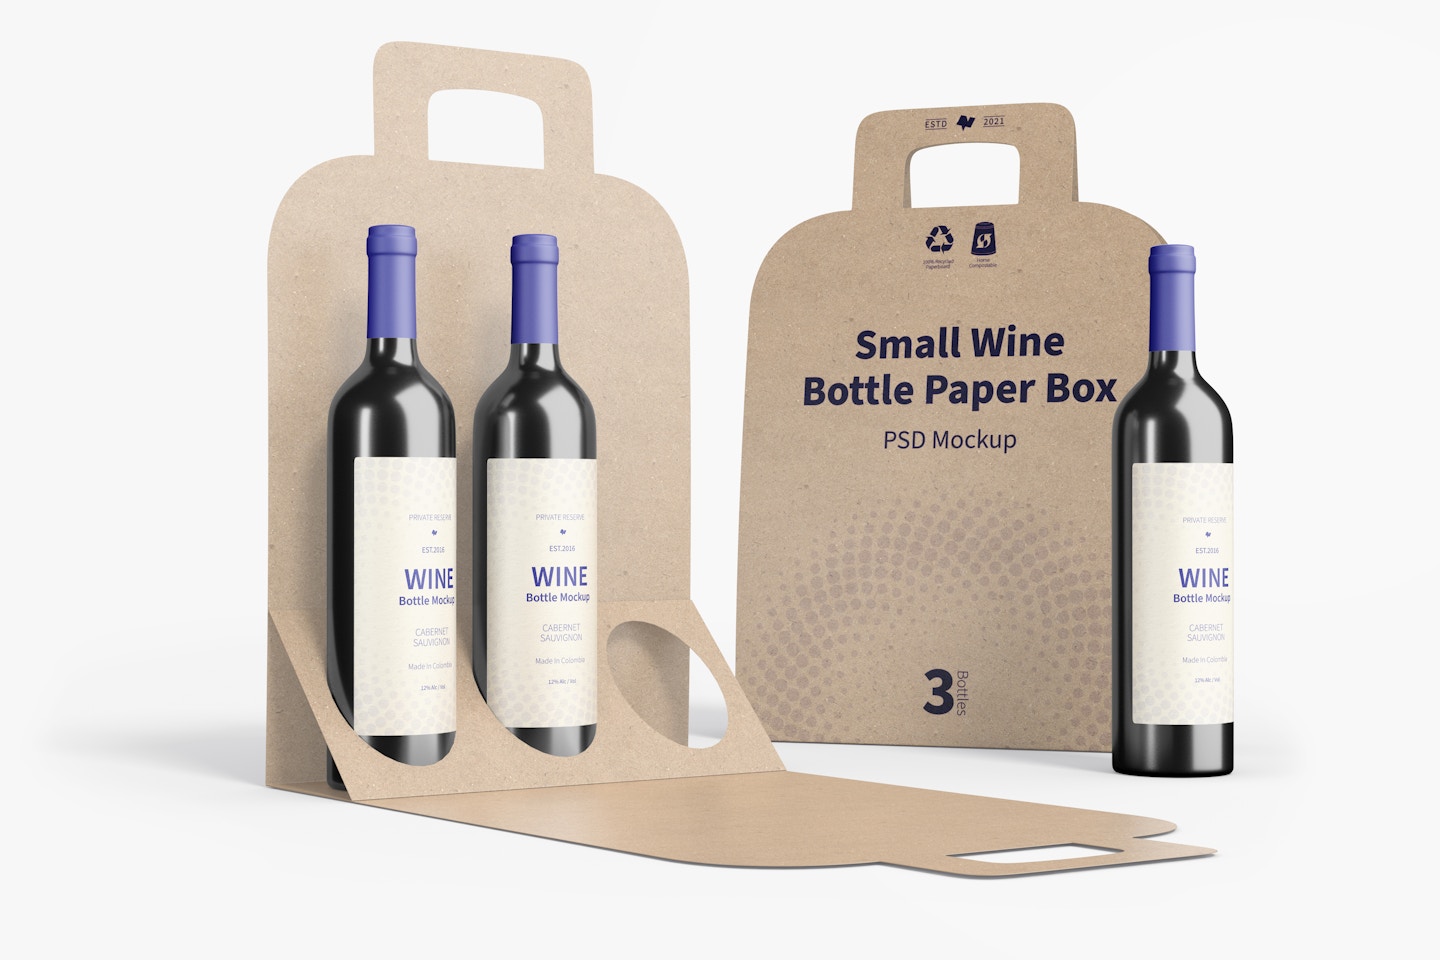 Small Wine Bottle Paper Boxes Mockup